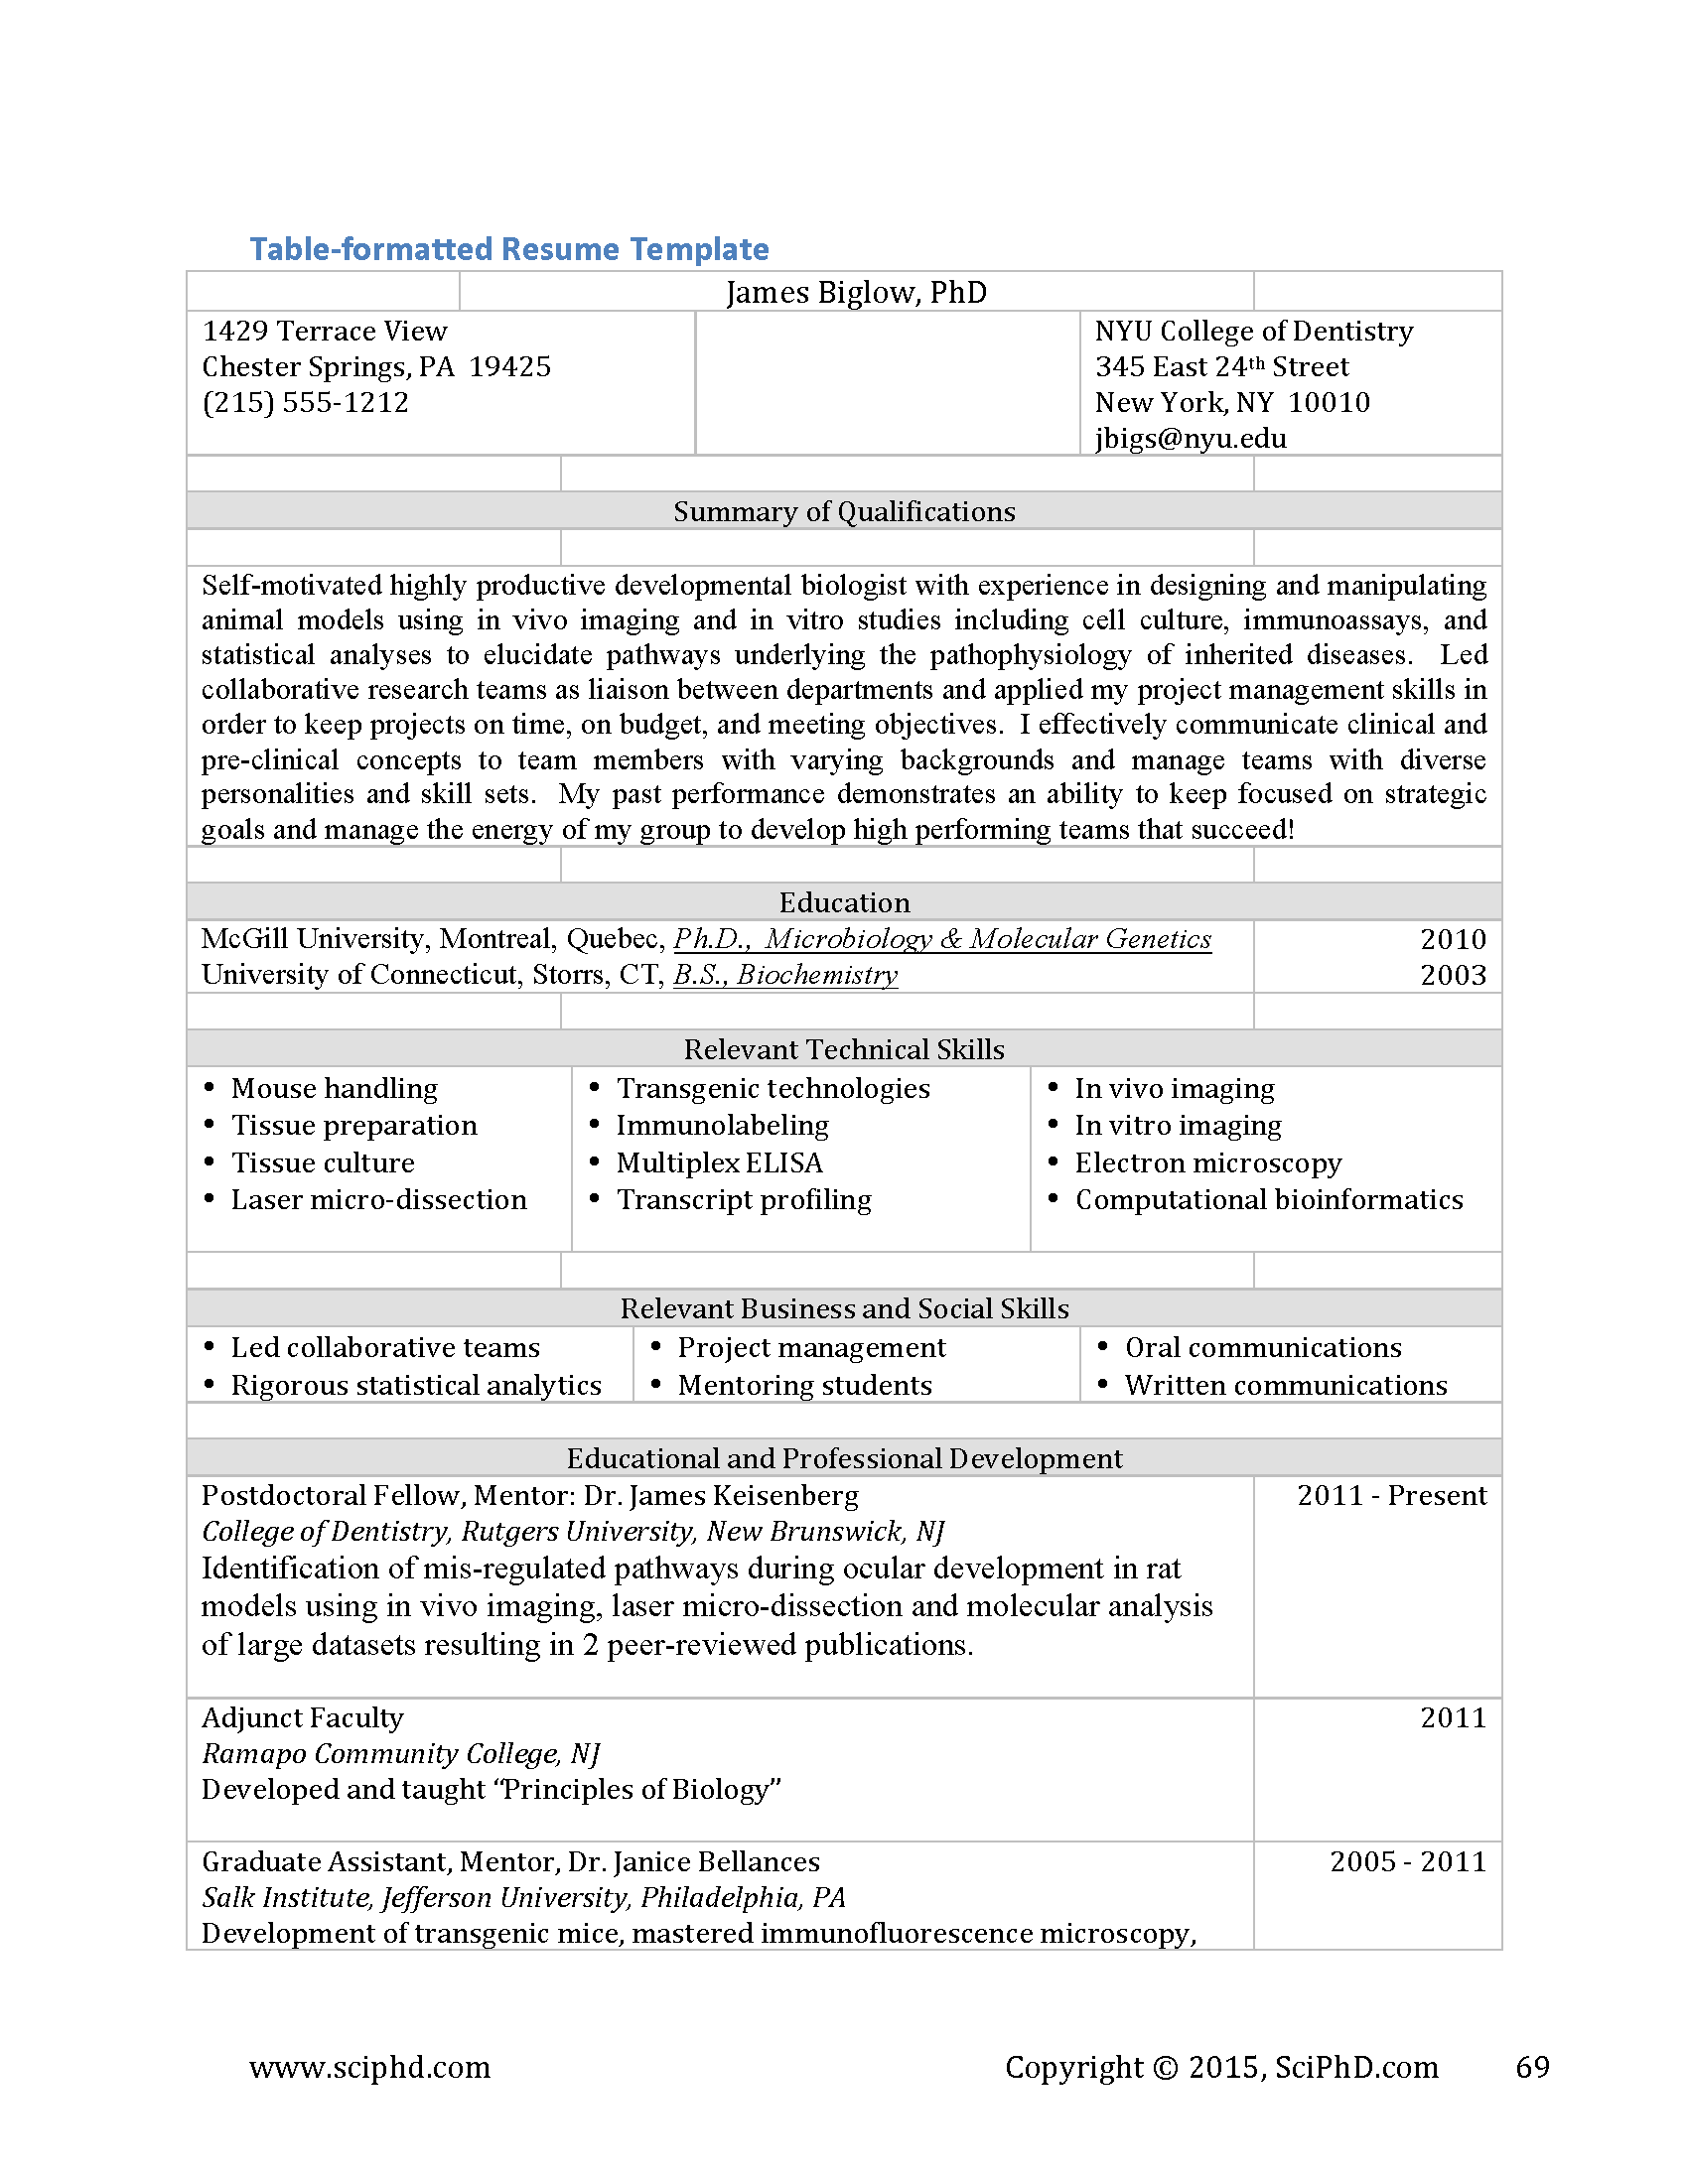 Targeted Resume example_Page_1